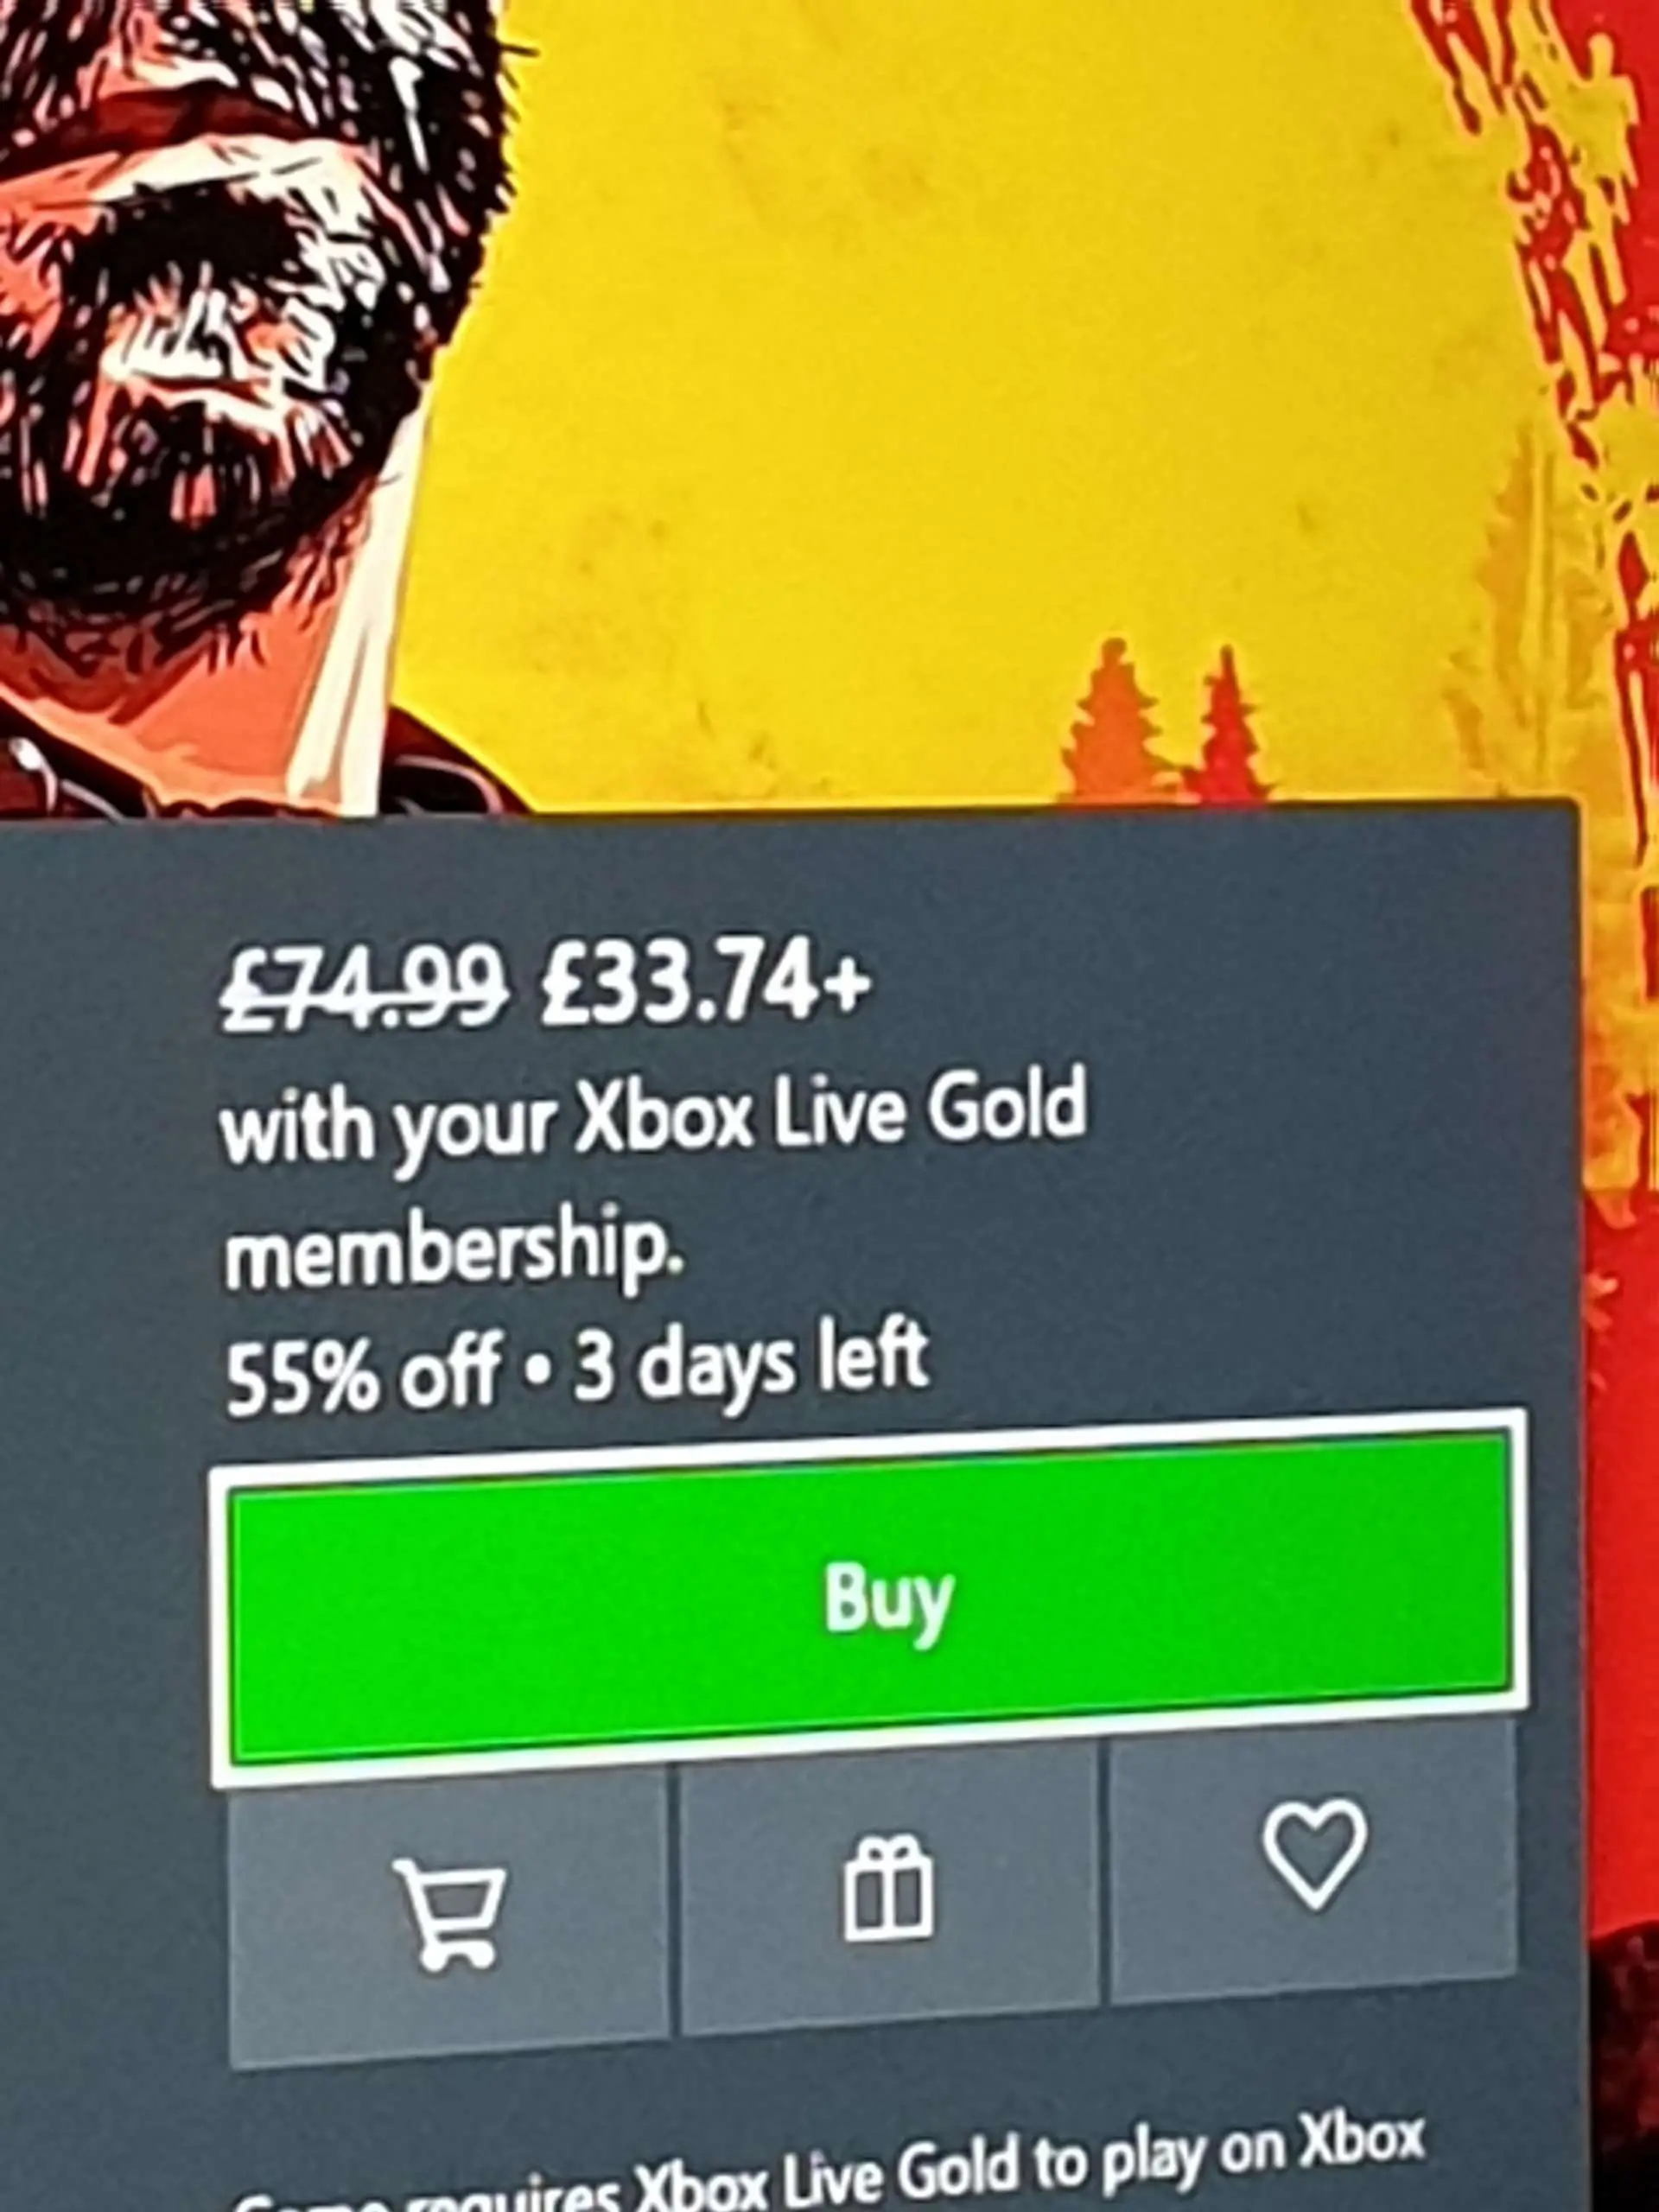 Do I get to play after xbox live gold expires, since its ...